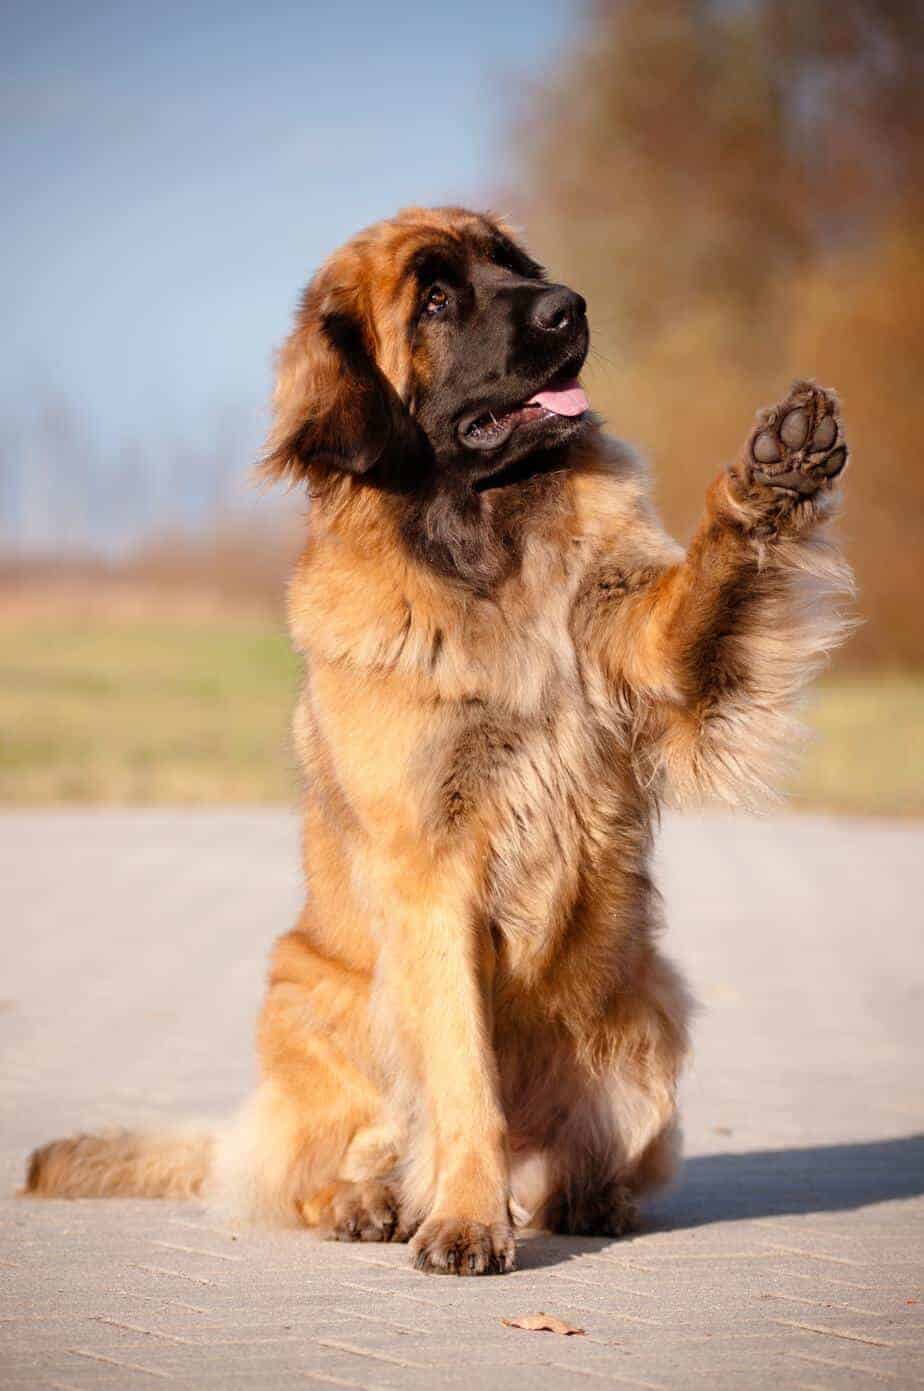 The Leonberger Is A Gentle Giant That Enjoys Spending Time With People